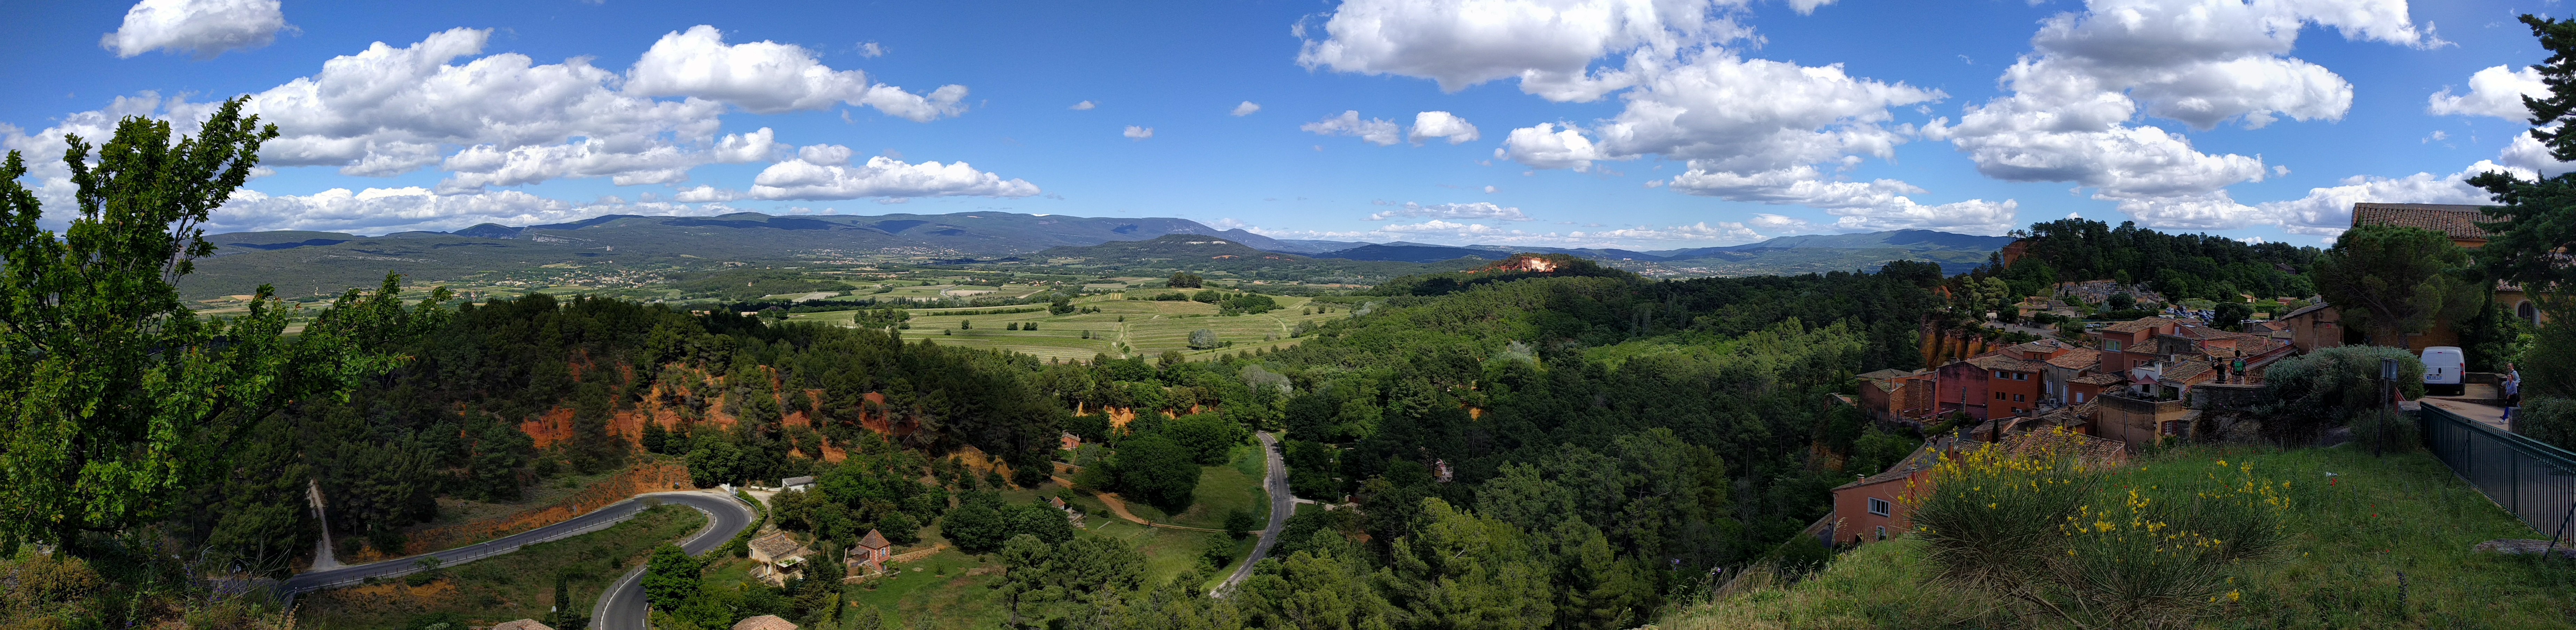 A panorama looking out when driving over to Roussillon, not far from Gordes. The town is famous for its history of ochre mining (note the earth's coloring)